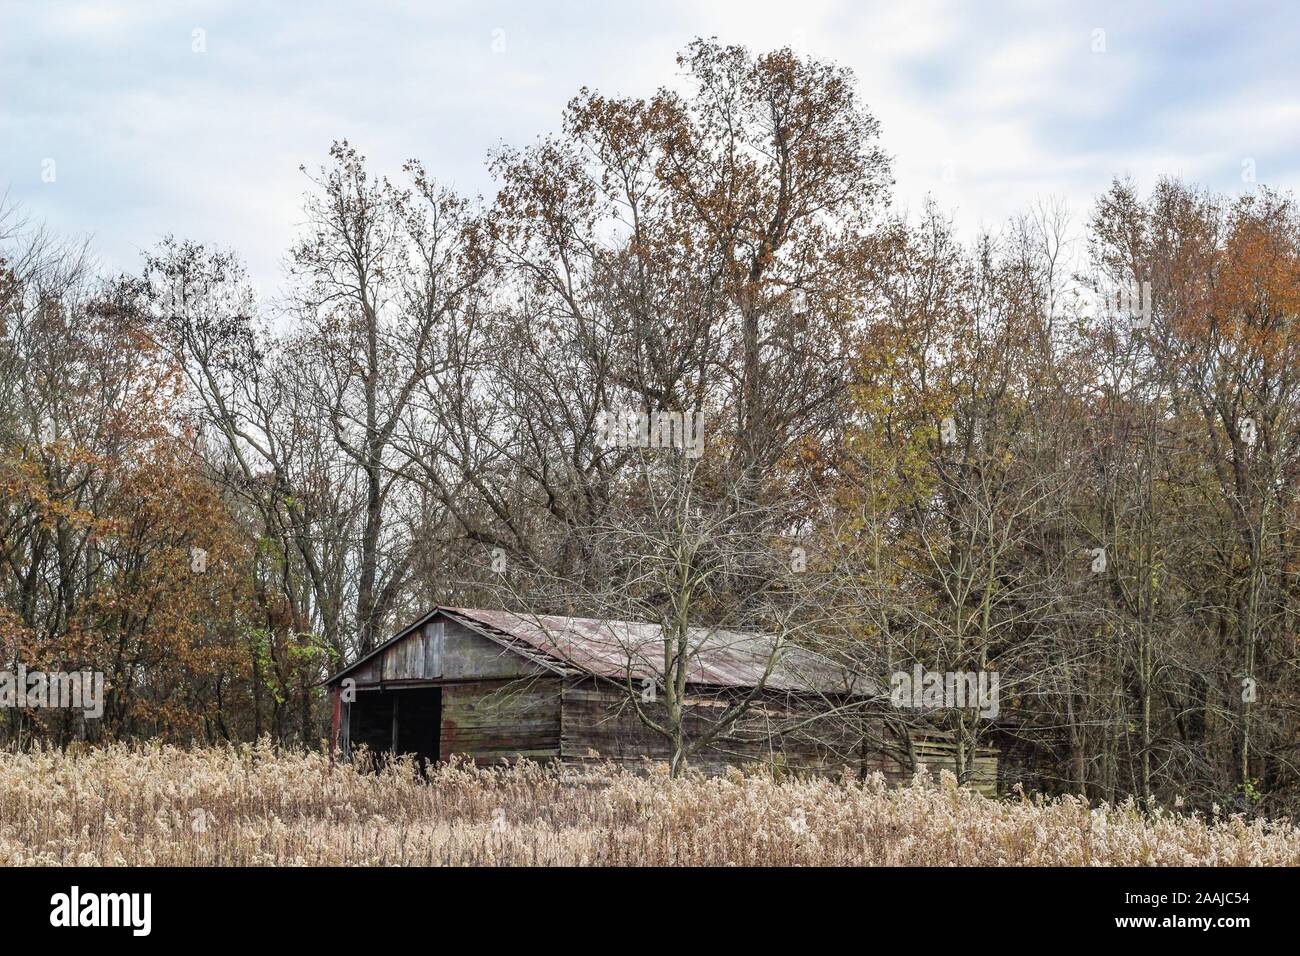 Abandoned tool shed with tall trees showing their fall foliage Stock Photo